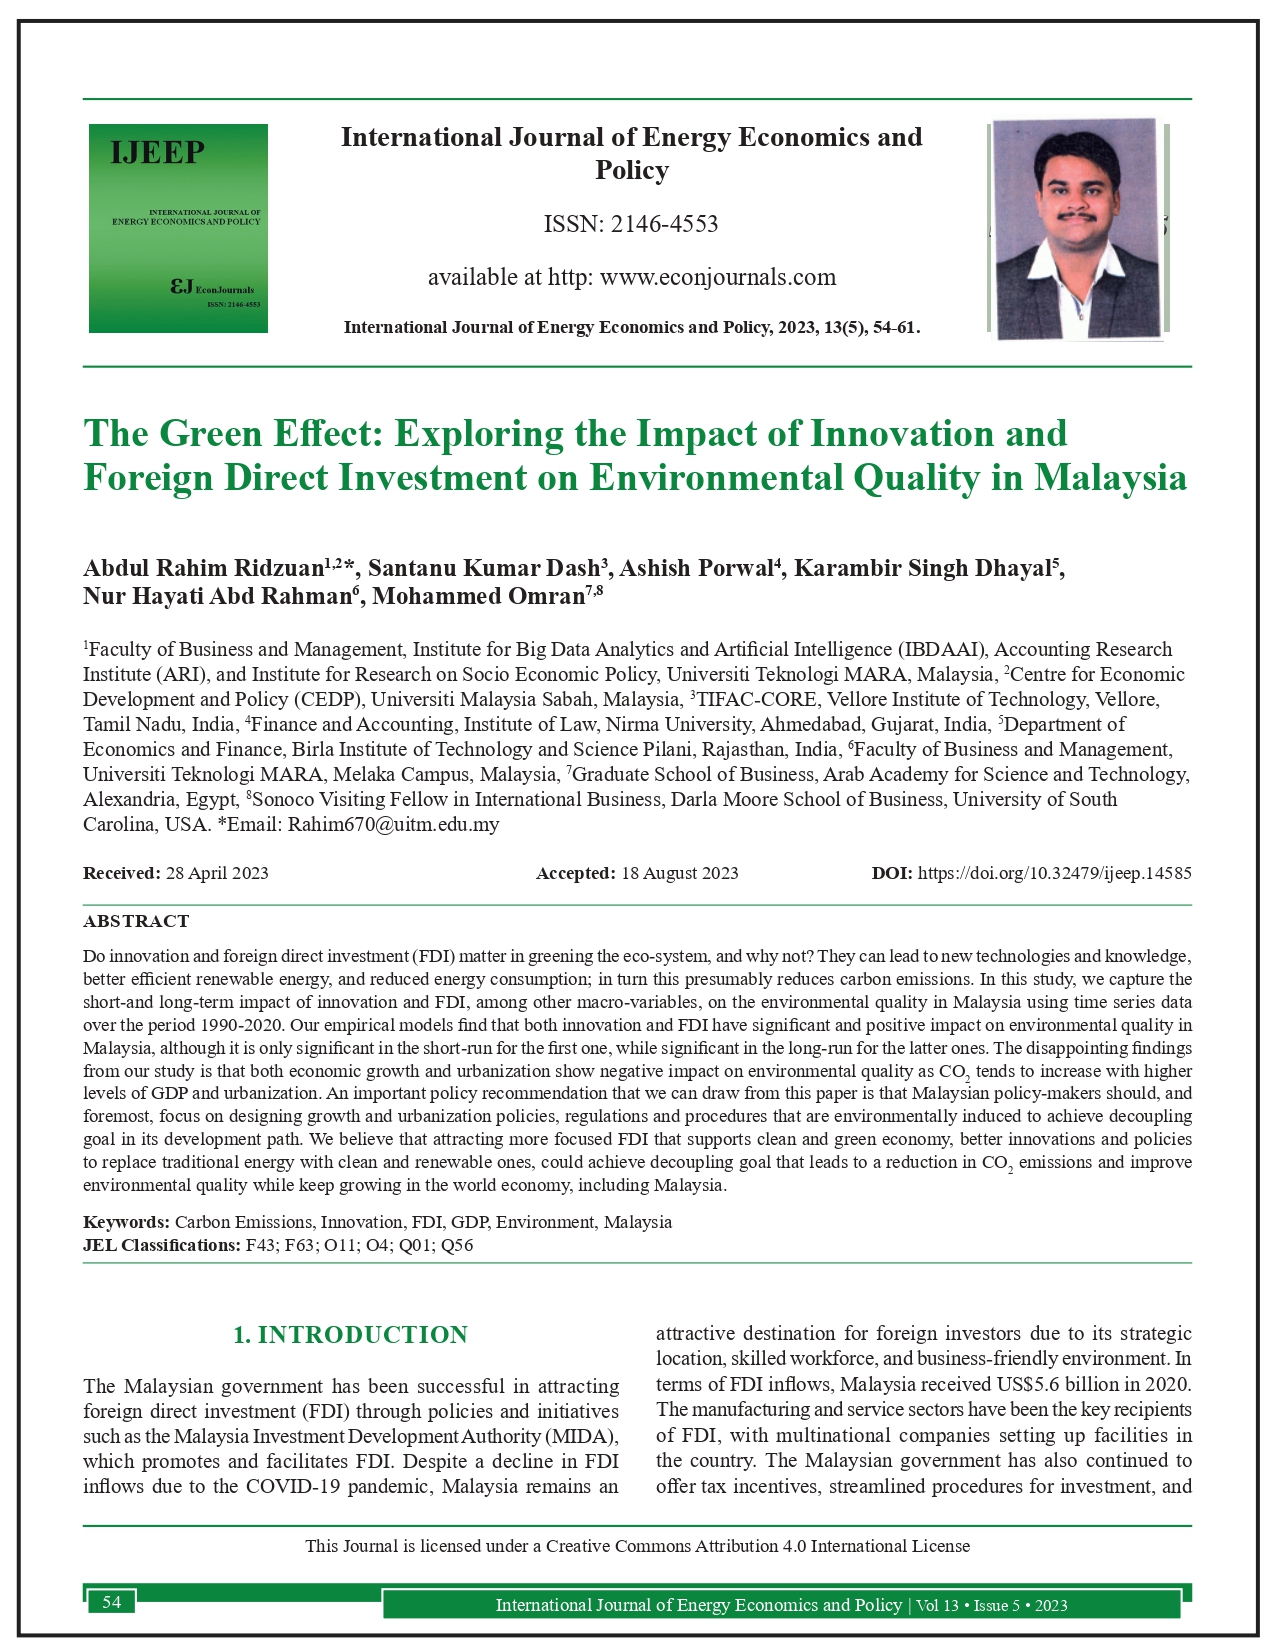 The Green Effect: Exploring the Impact of Innovation and Foreign Direct Investment on Environmental Quality in Malaysia